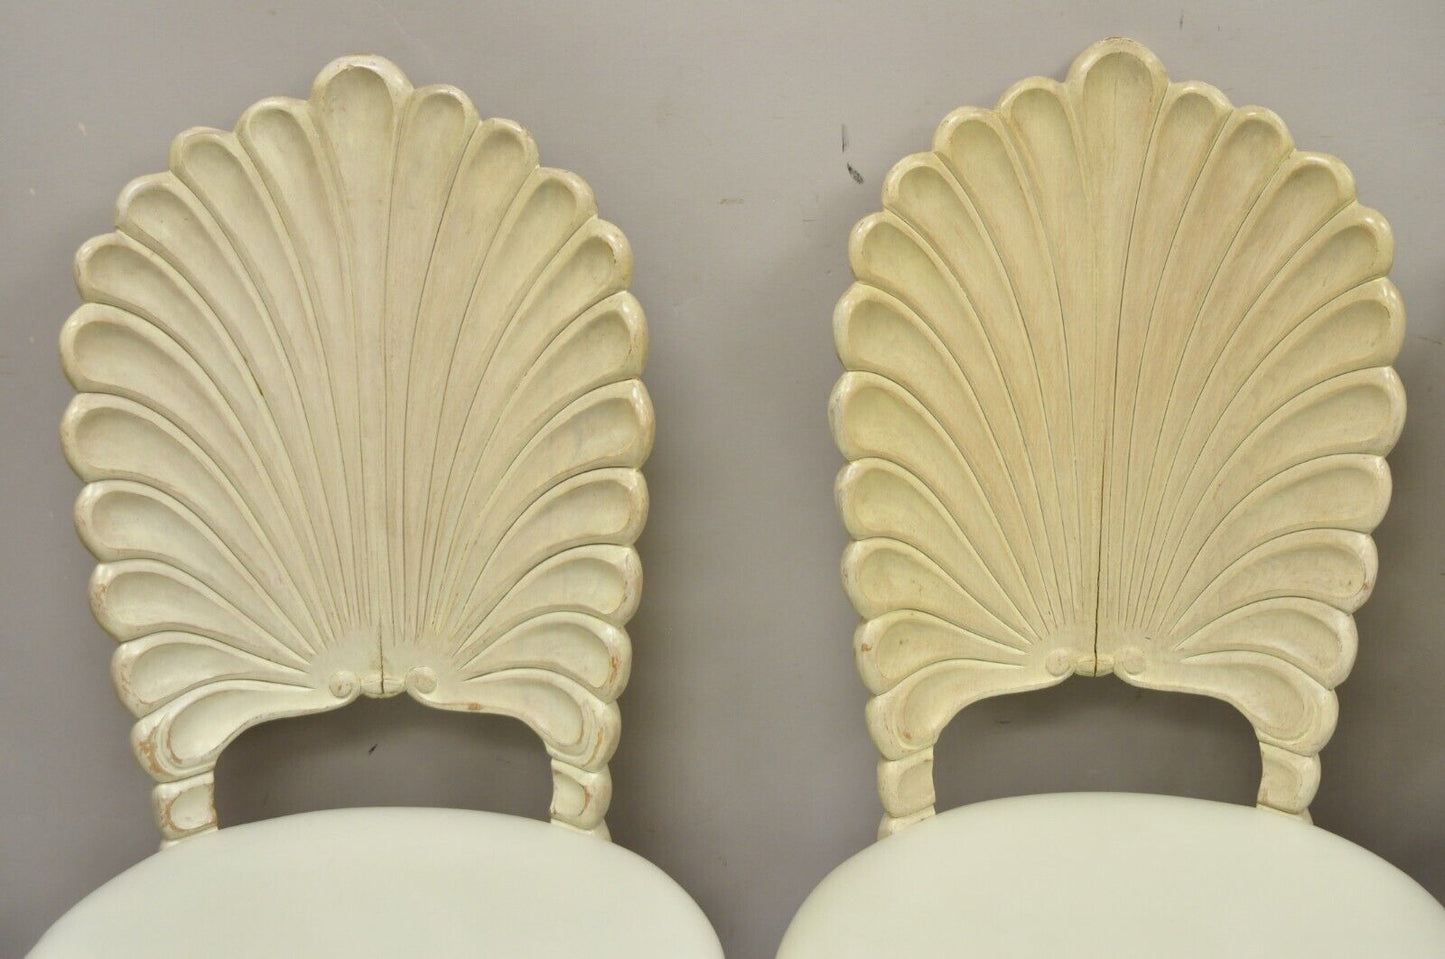 Vintage Hollywood Regency Venetian Grotto Shell Back Dining Chairs - Set of 4